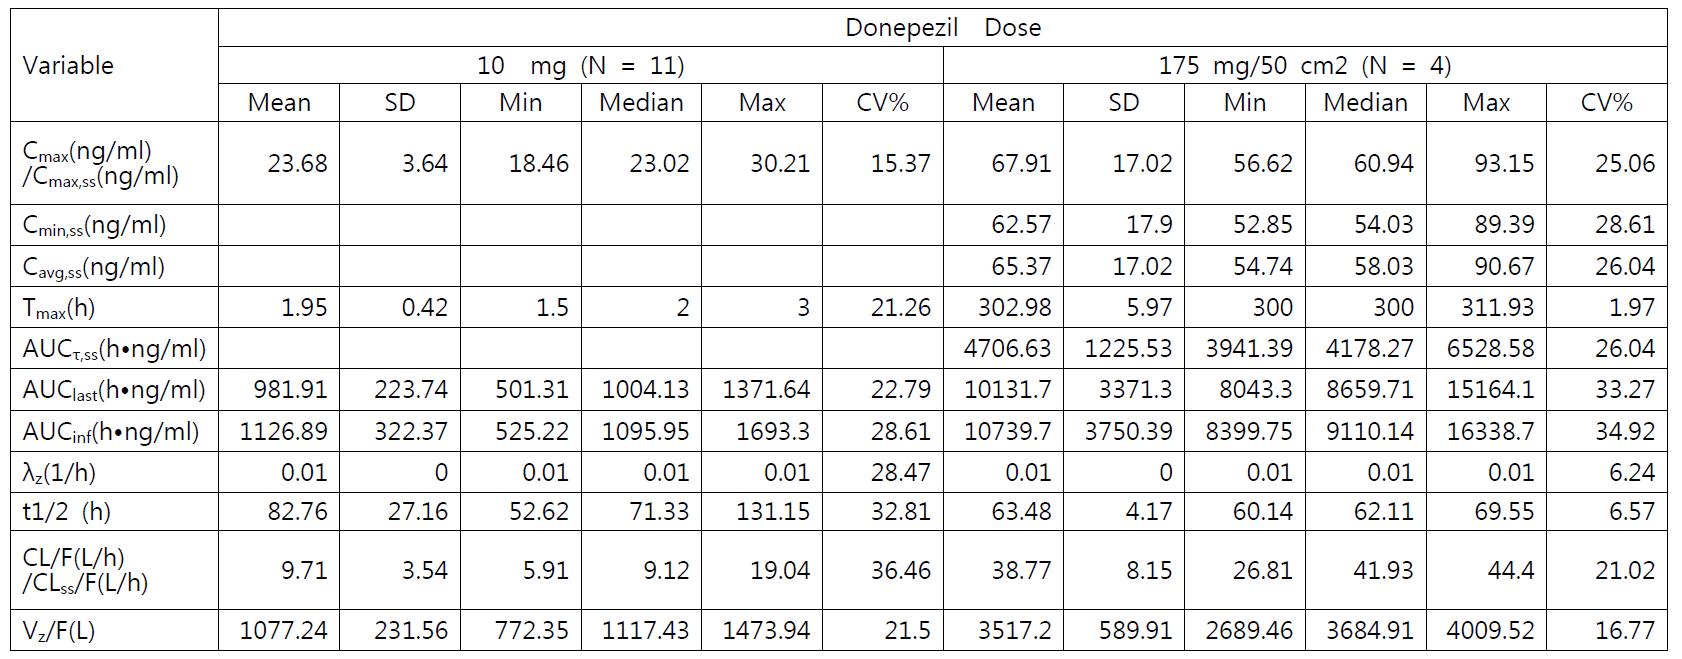 Pharmacokinetics parameters of Donenepezil oral vs. patch